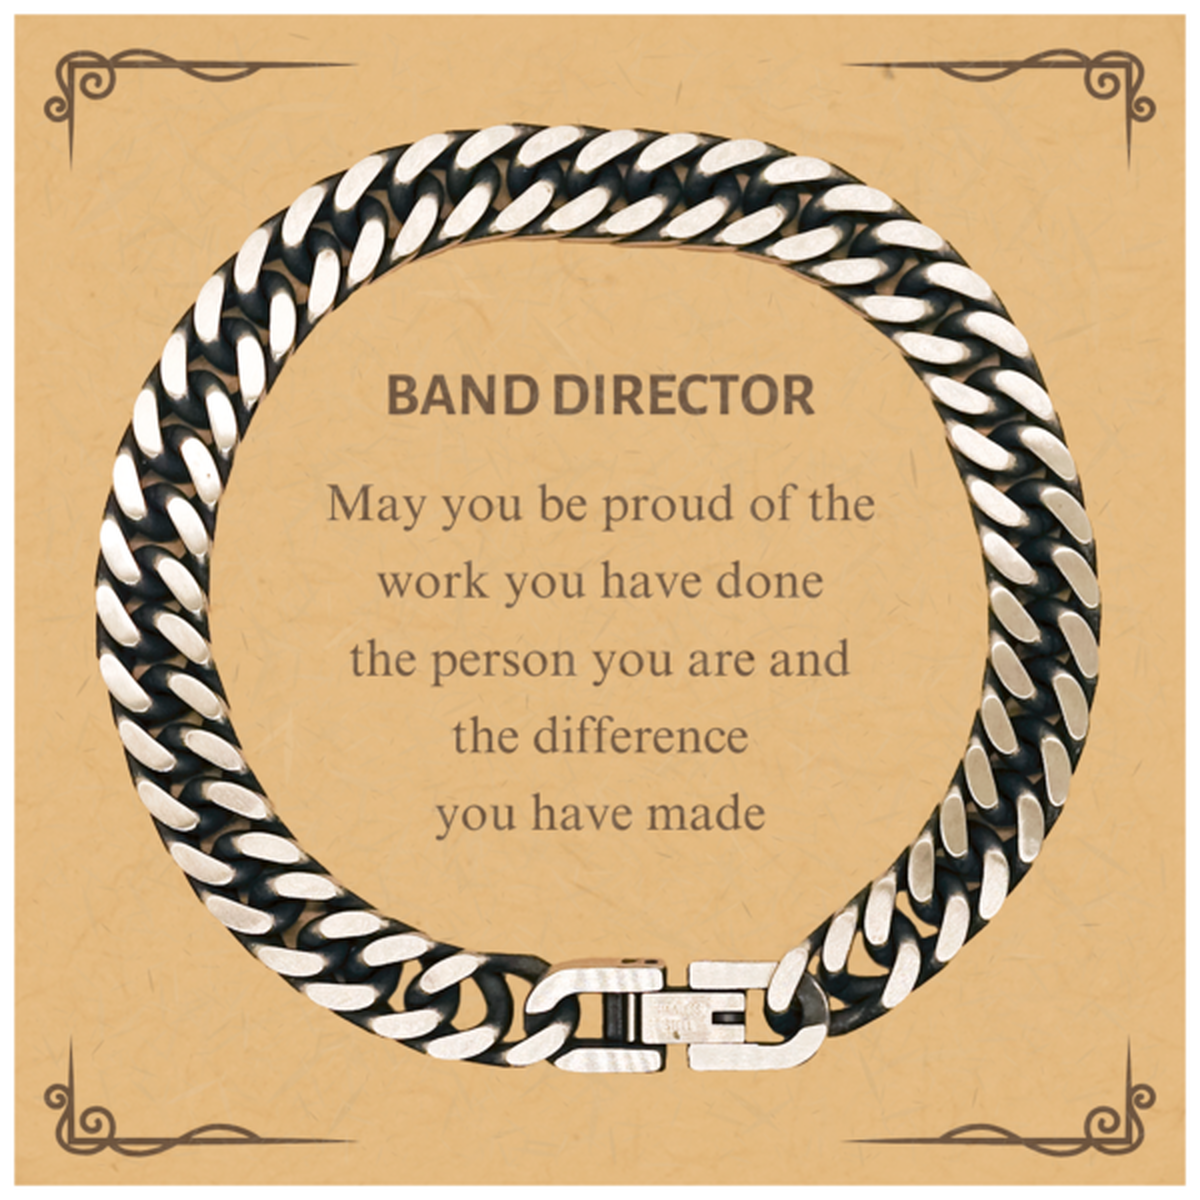 Band Director May you be proud of the work you have done, Retirement Band Director Cuban Link Chain Bracelet for Colleague Appreciation Gifts Amazing for Band Director